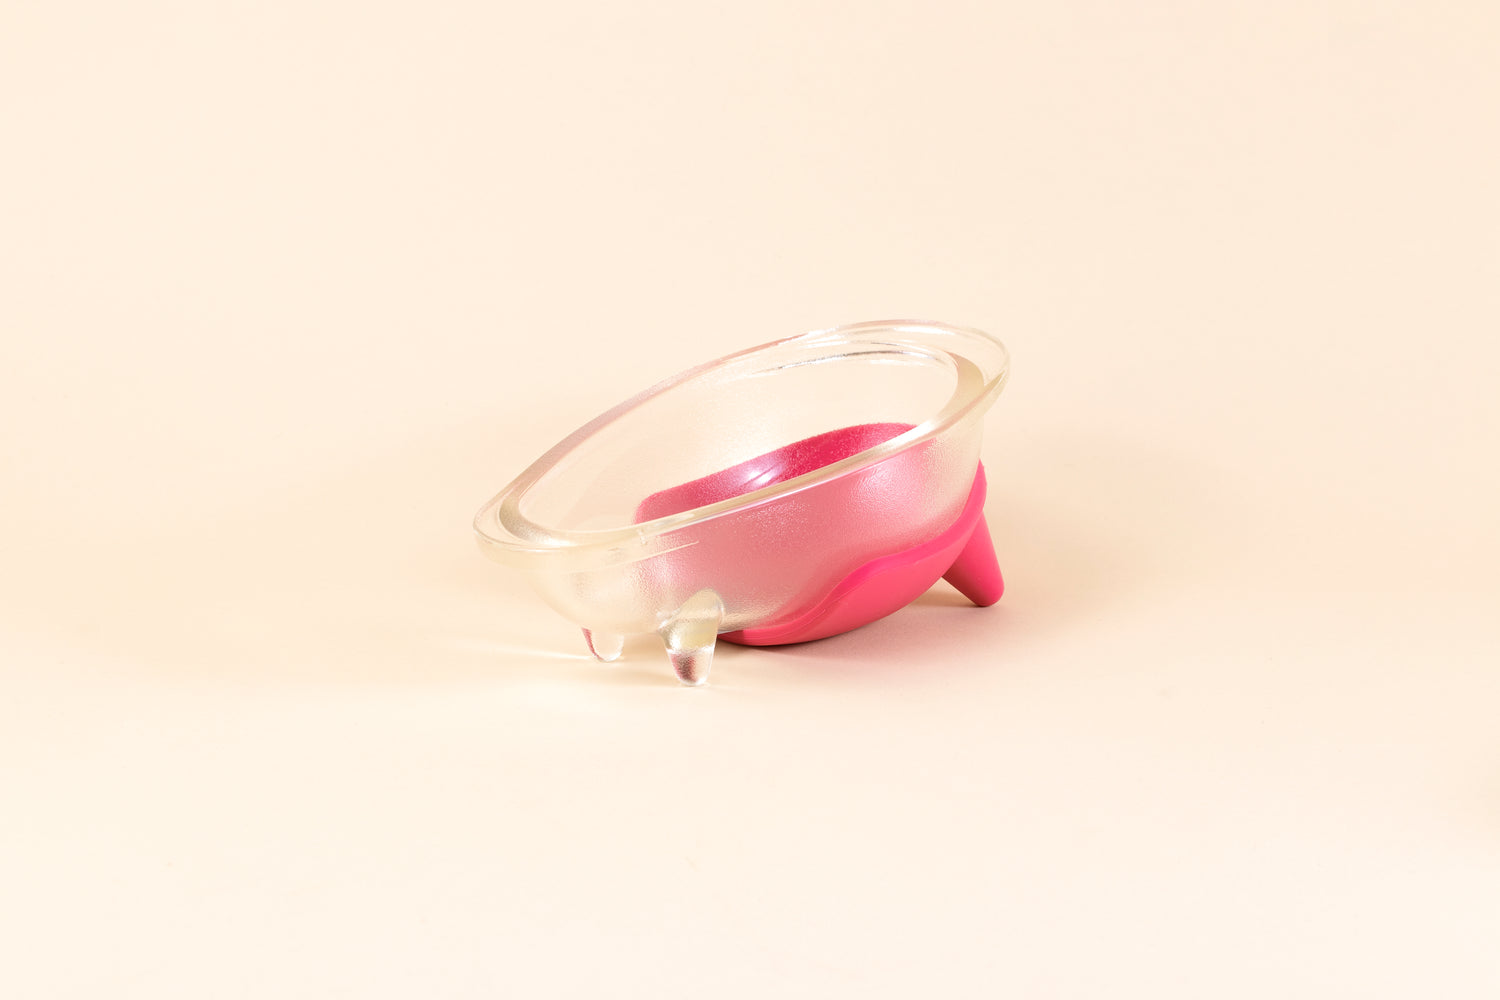 Glass dog bowl shaped like a bathtub with pink silicone non-slip mat.